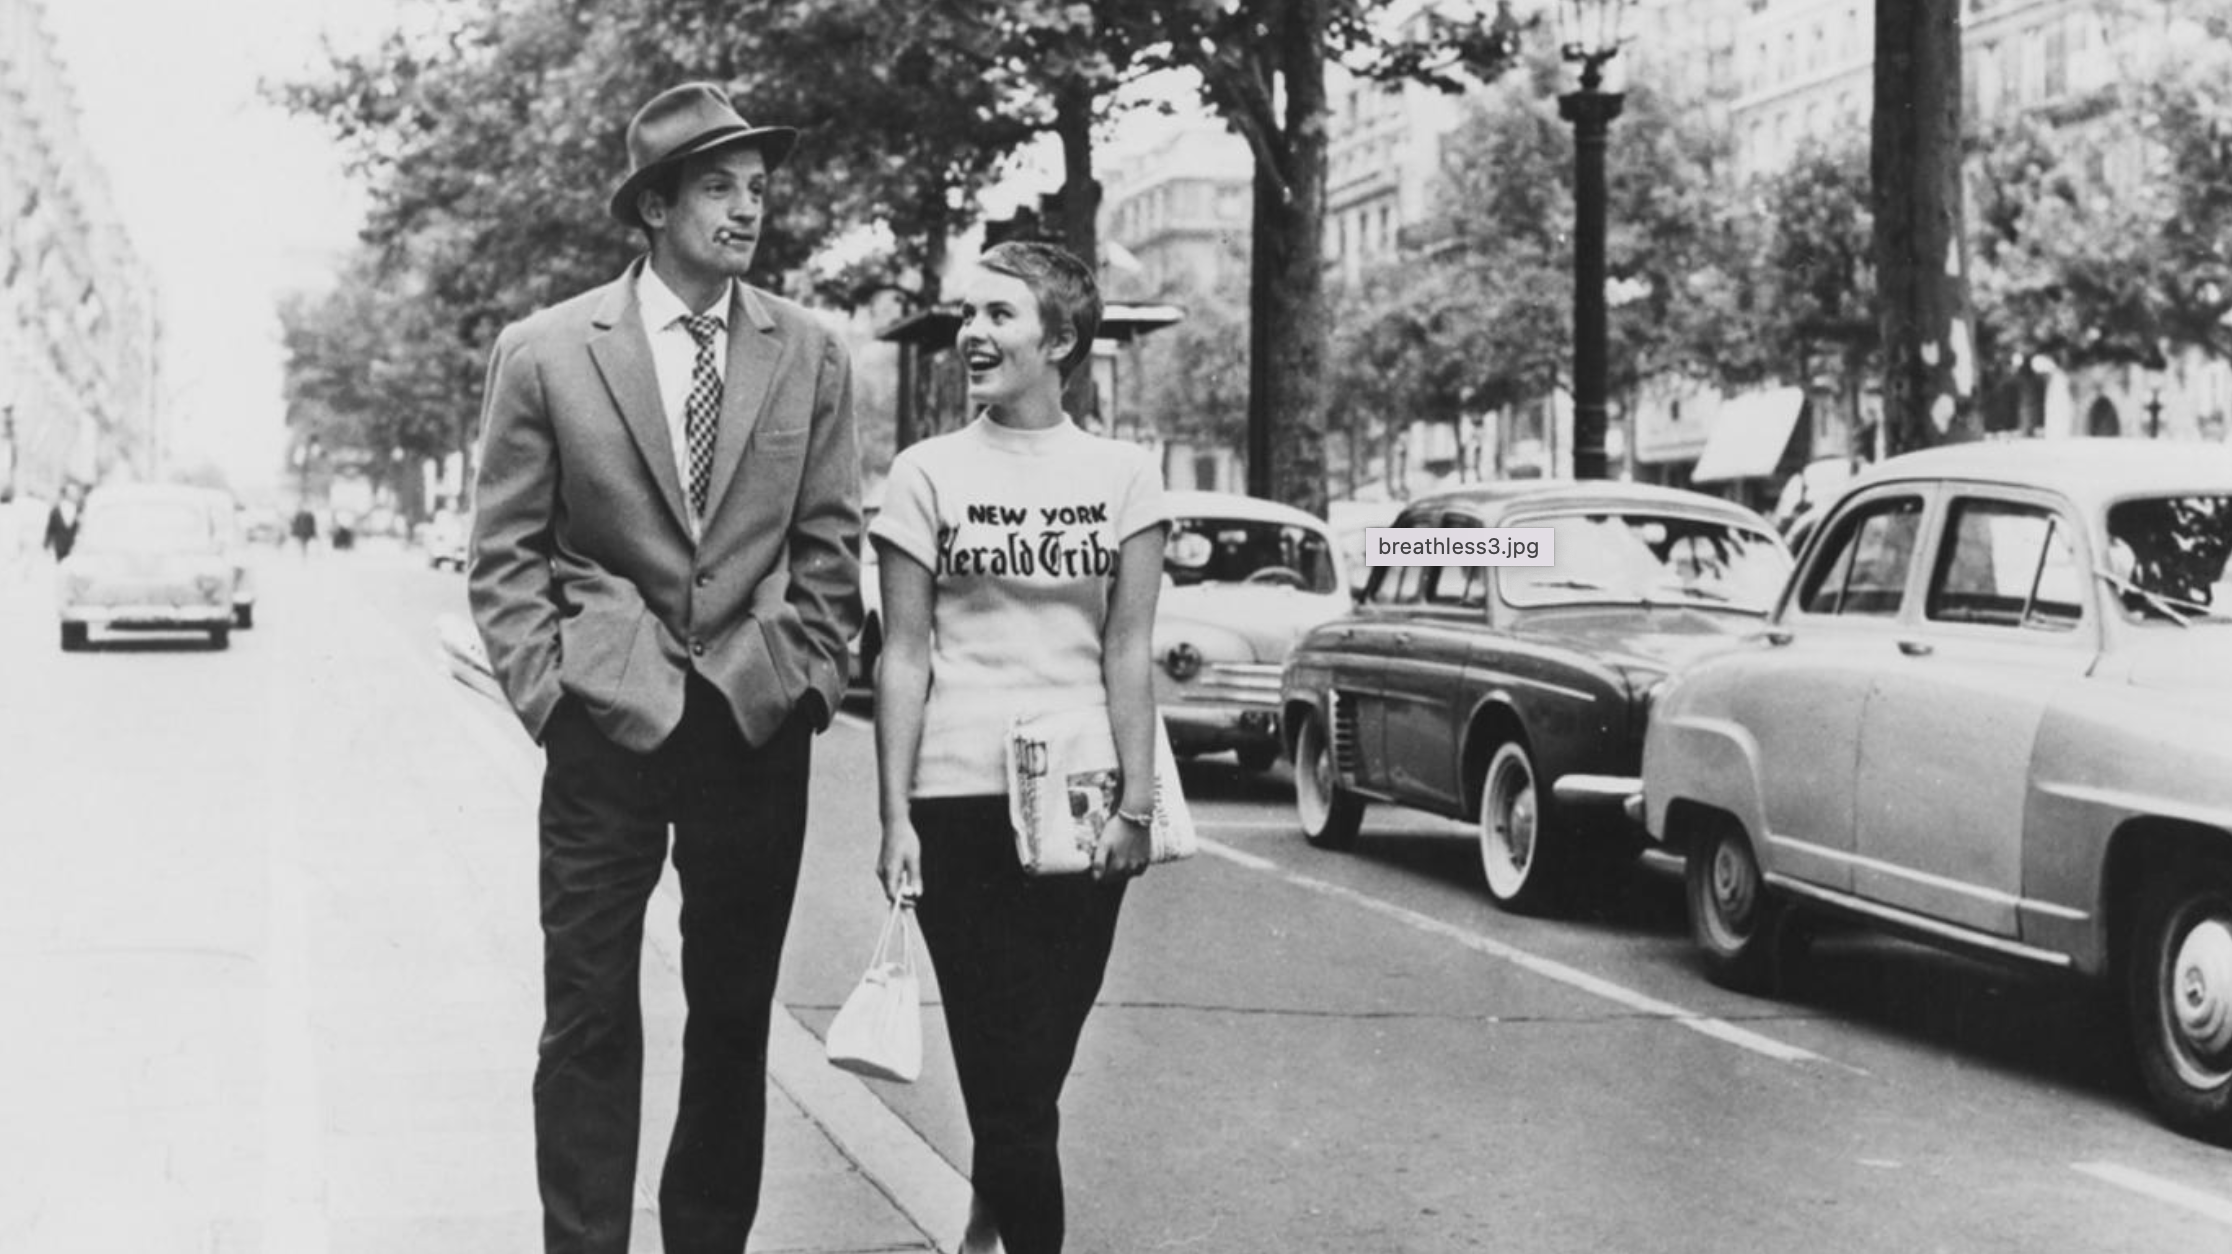 Review: 'Breathless' is back, a fascinating landmark of the French